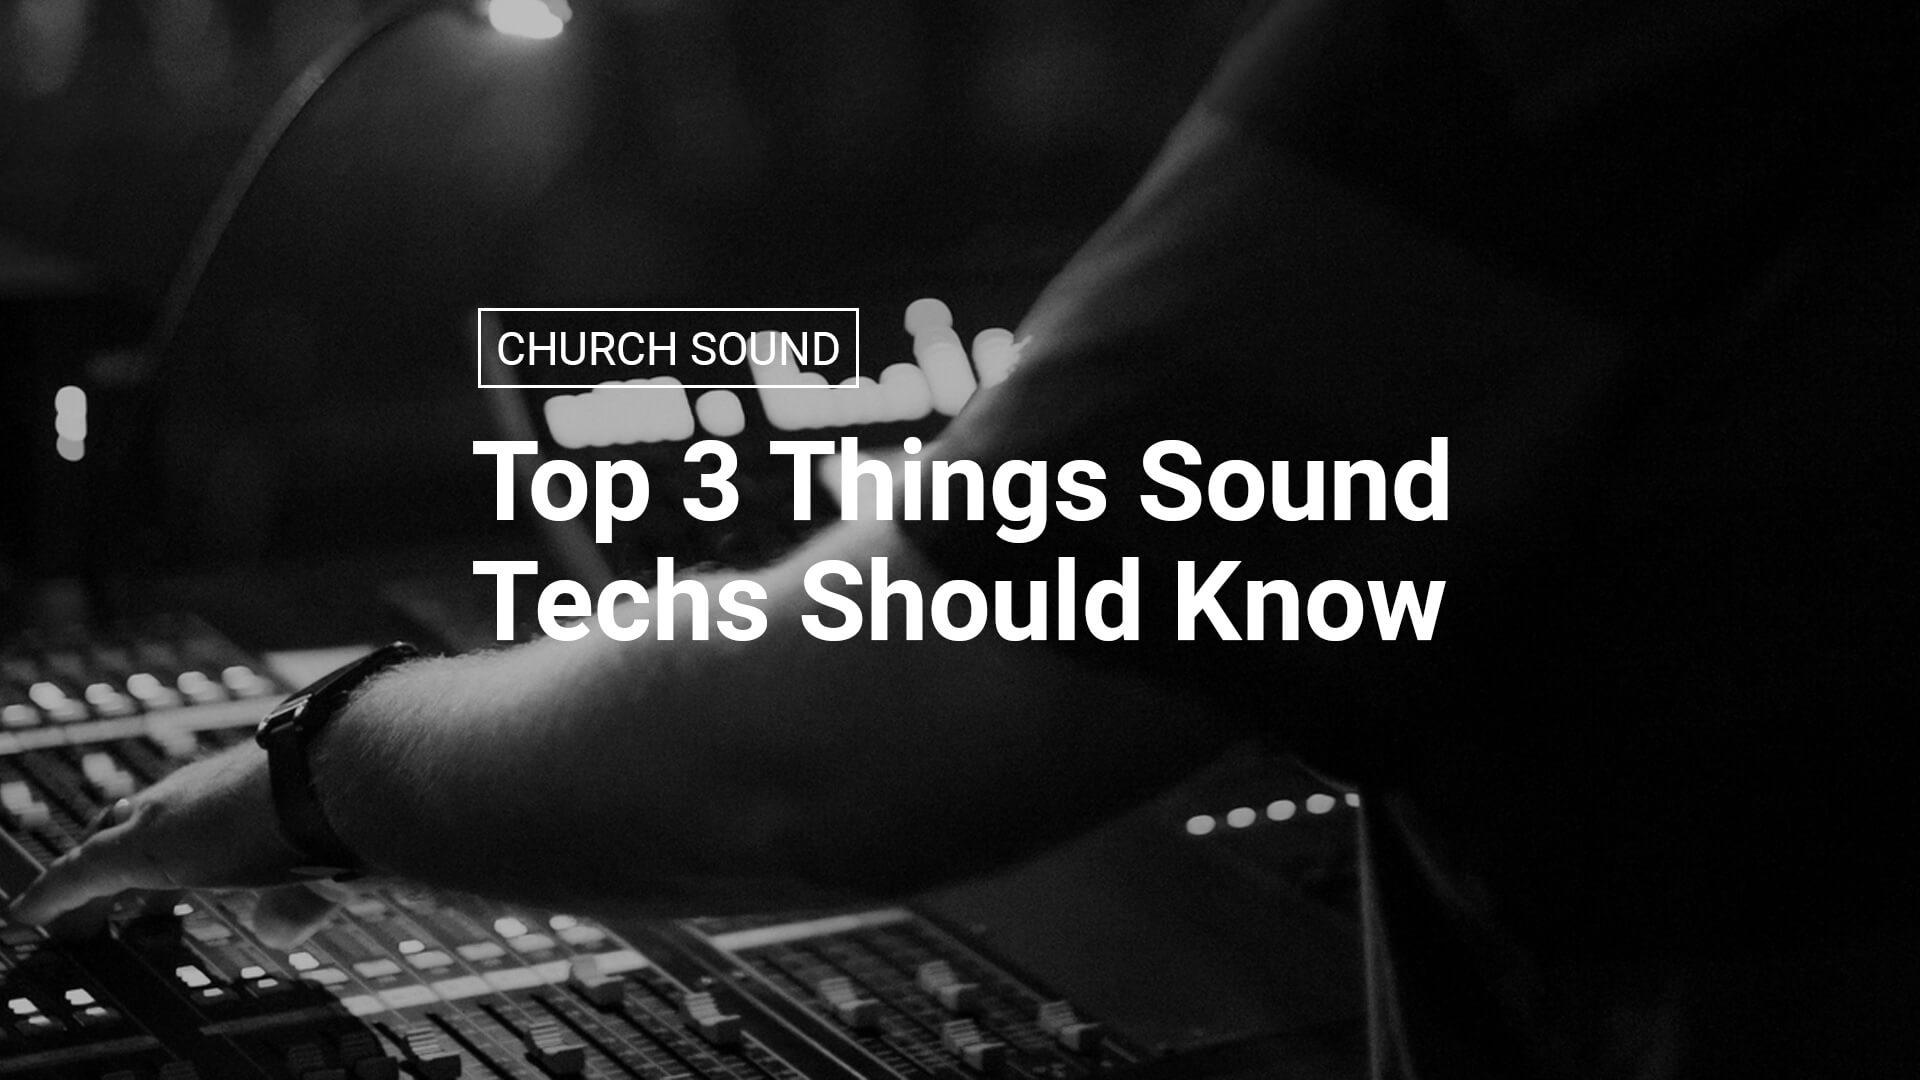 Top 3 Things Sound Techs Should Know